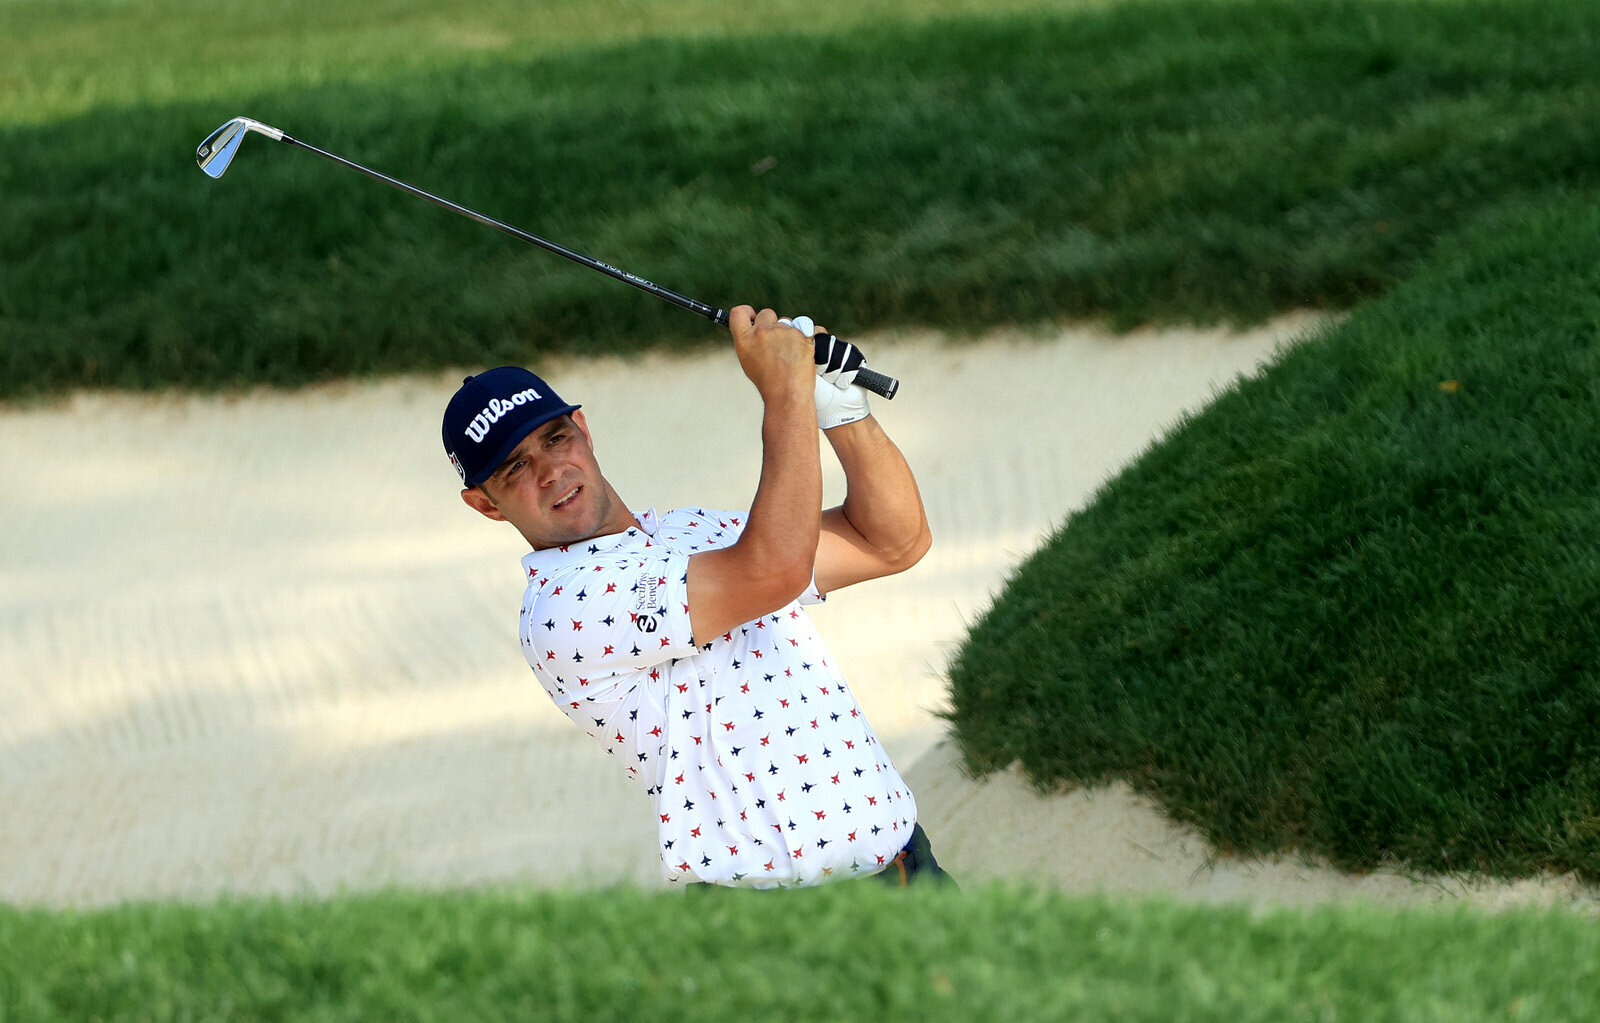  DUBLIN, OHIO - JULY 17: Gary Woodland of the United States plays a shot on the 18th hole during the second round of The Memorial Tournament on July 17, 2020 at Muirfield Village Golf Club in Dublin, Ohio. (Photo by Sam Greenwood/Getty Images) 